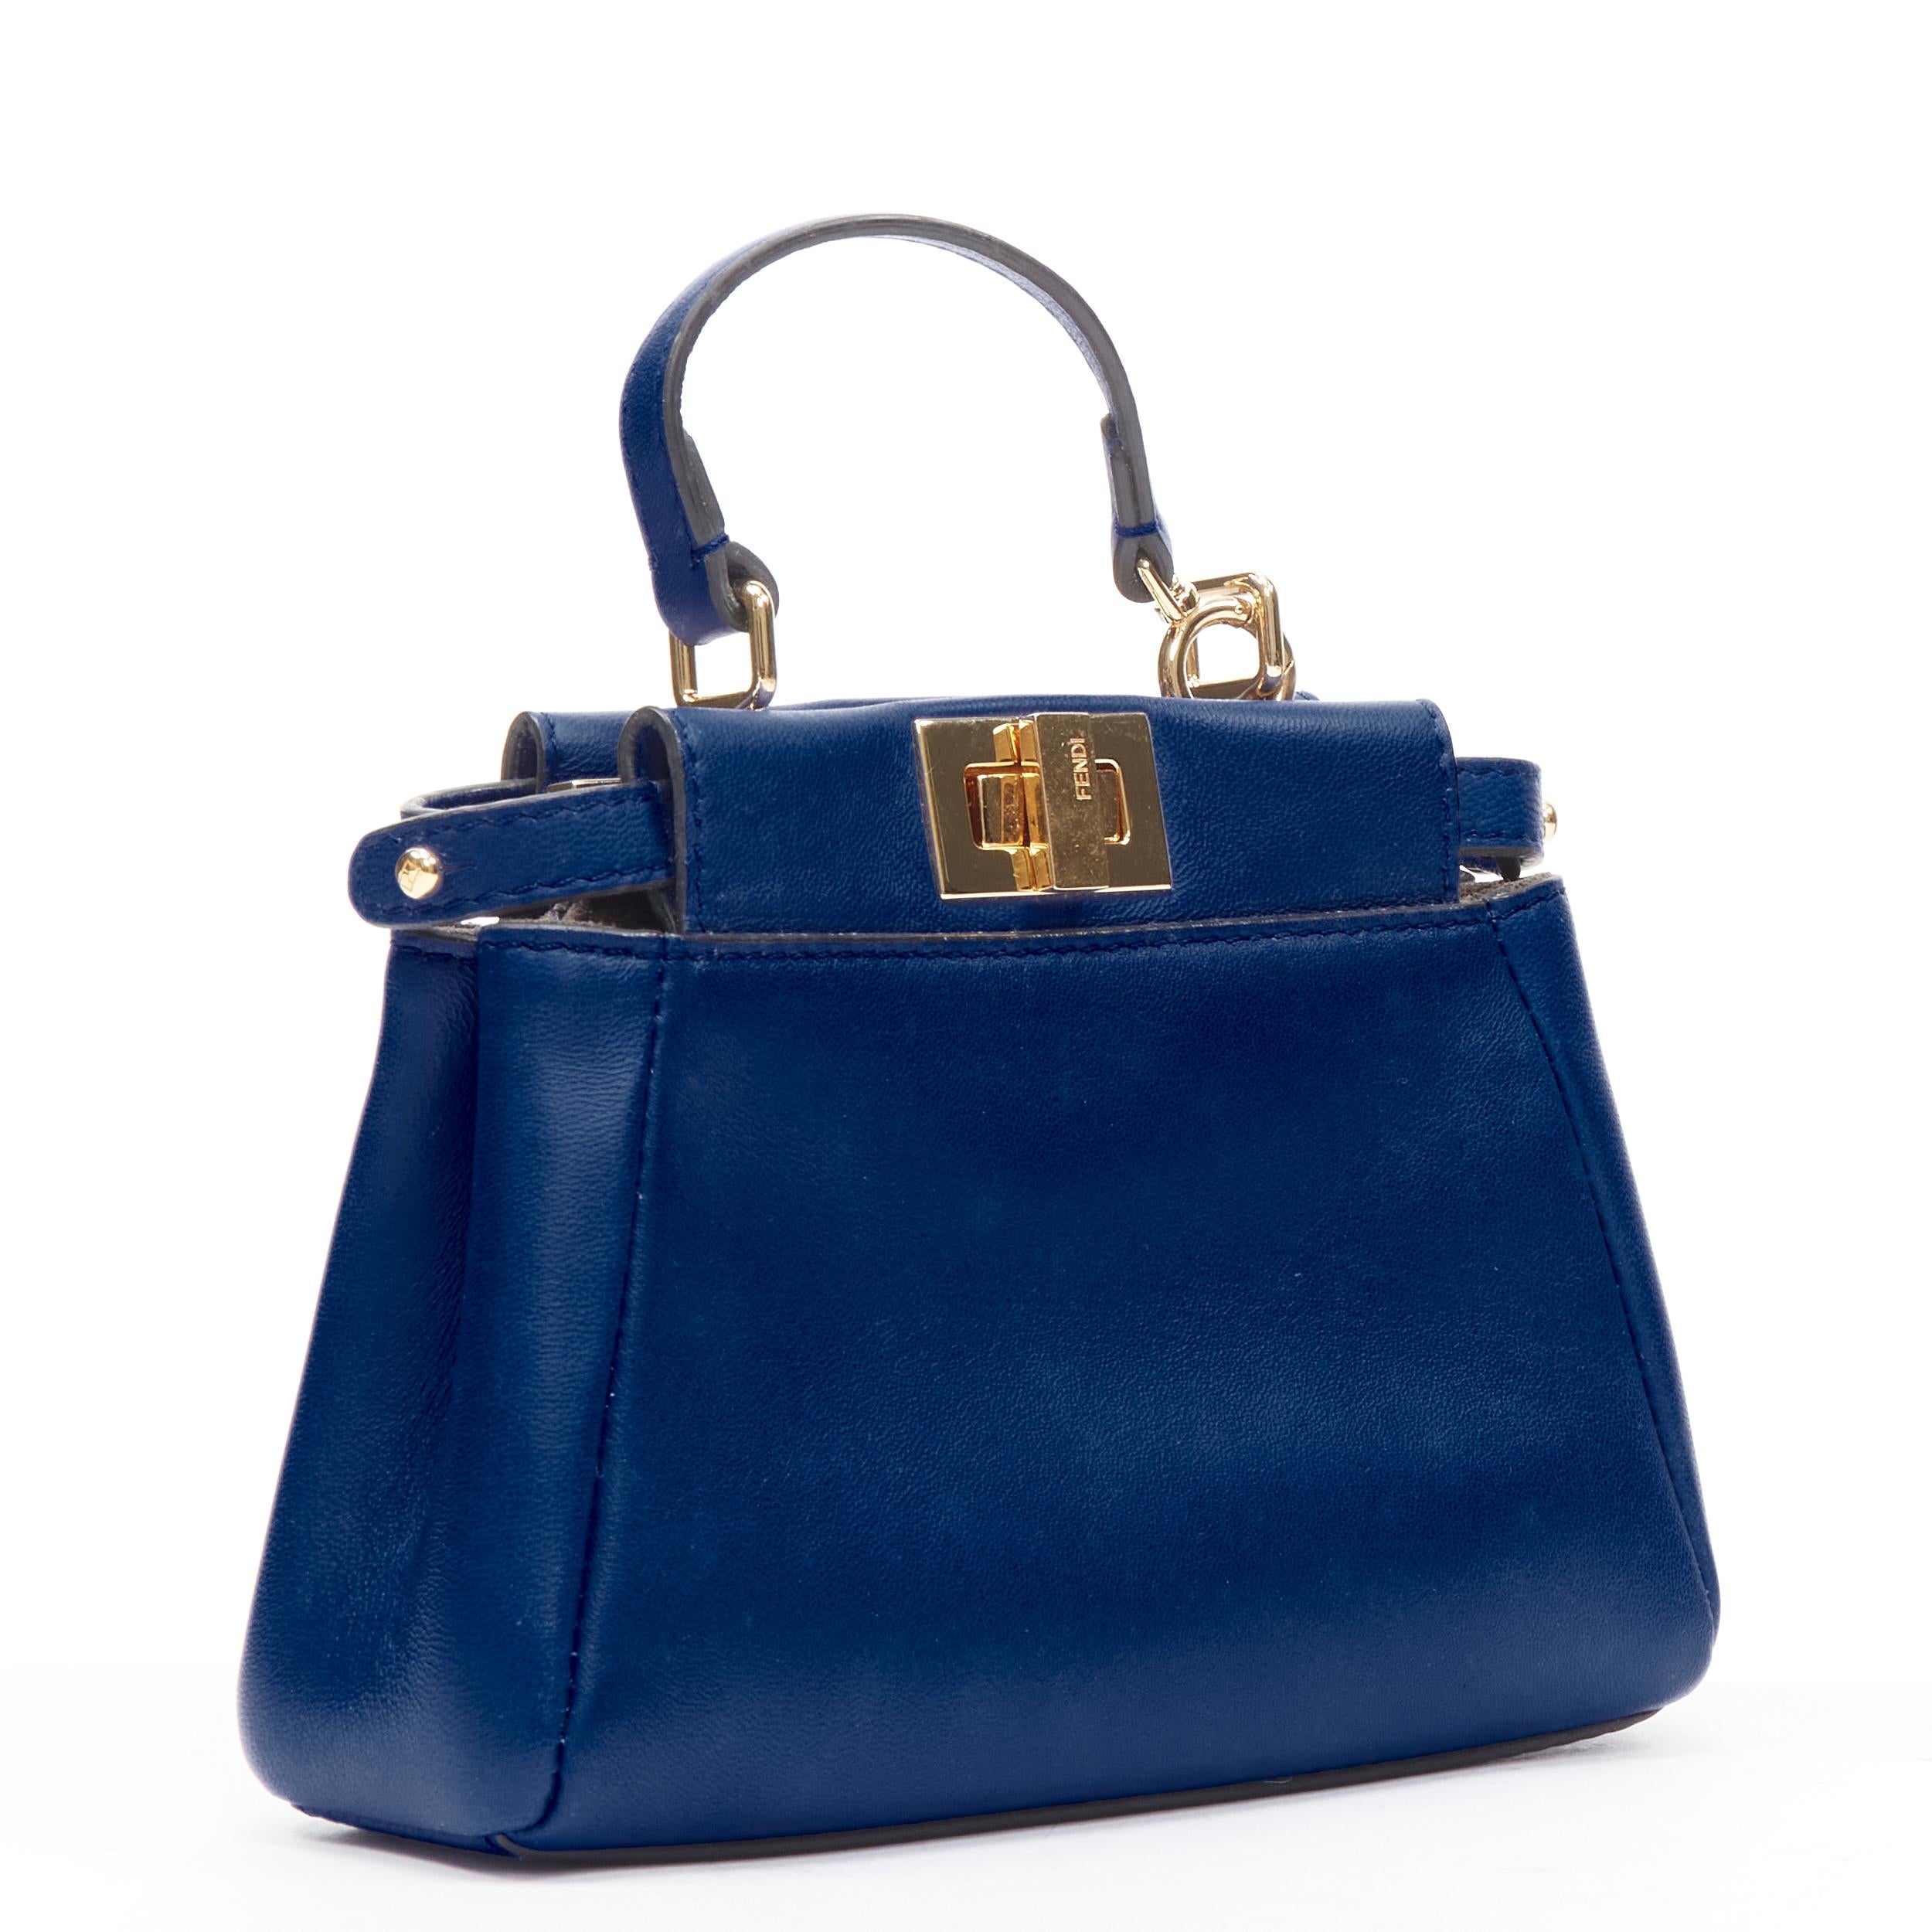 FENDI Micro Peekaboo blue leather gold hardware crossbody bag
Reference: TACW/A00022
Brand: Fendi
Model: 8M0355K471585177
Material: Leather
Color: Blue
Pattern: Solid
Closure: Turnlock
Lining: Leather
Estimated Retail Price: USD